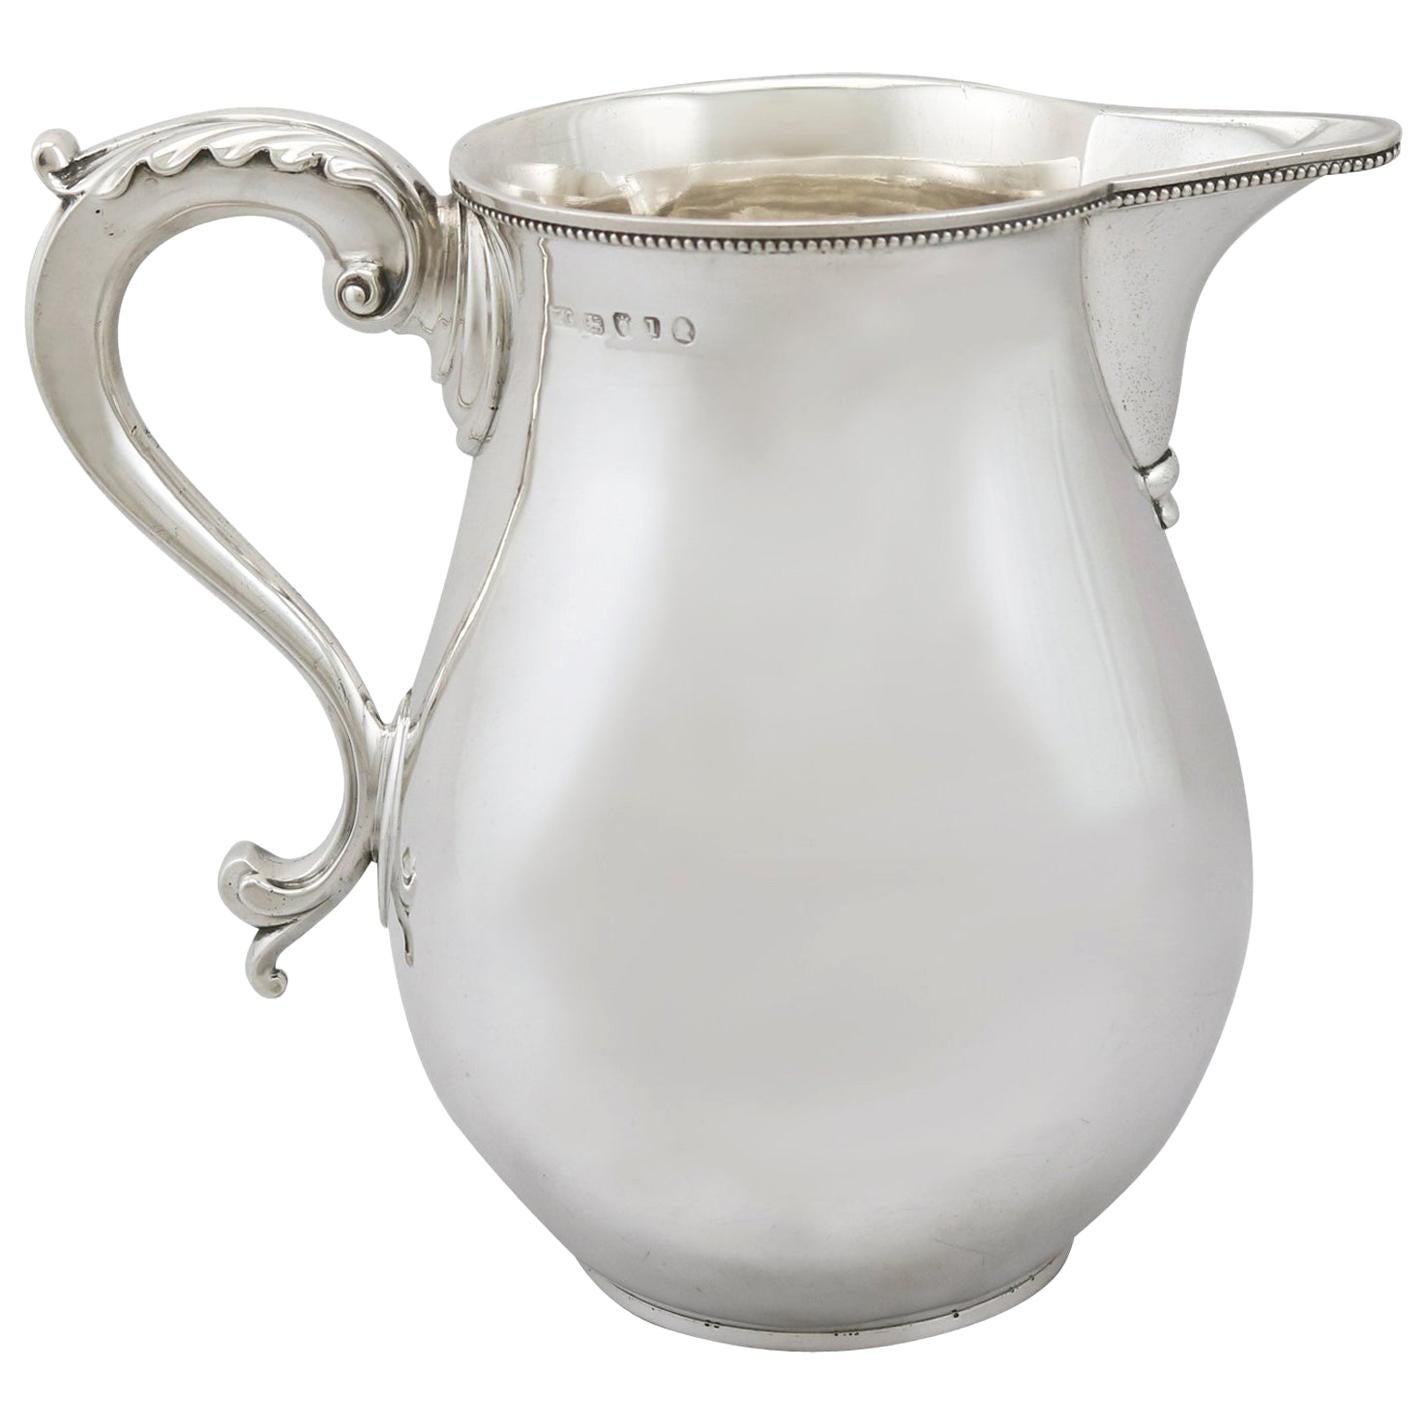 Antique 1780s Sterling Silver Beer or Water Jug by Thomas Chawner